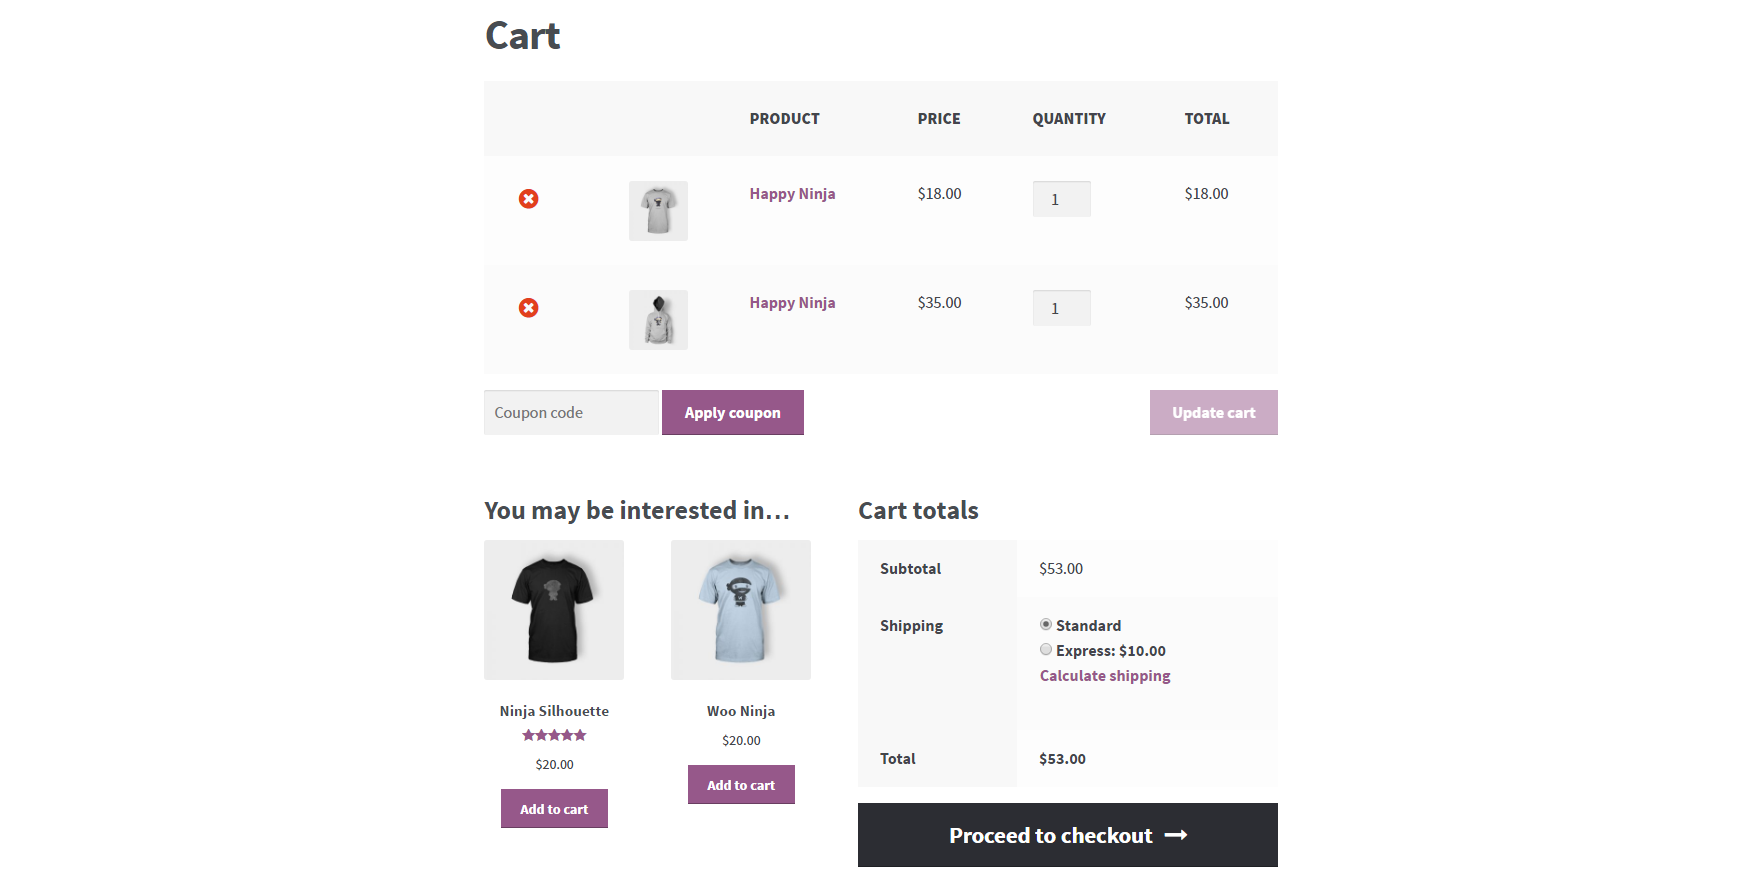 Table Rate Shipping for WooCommerce